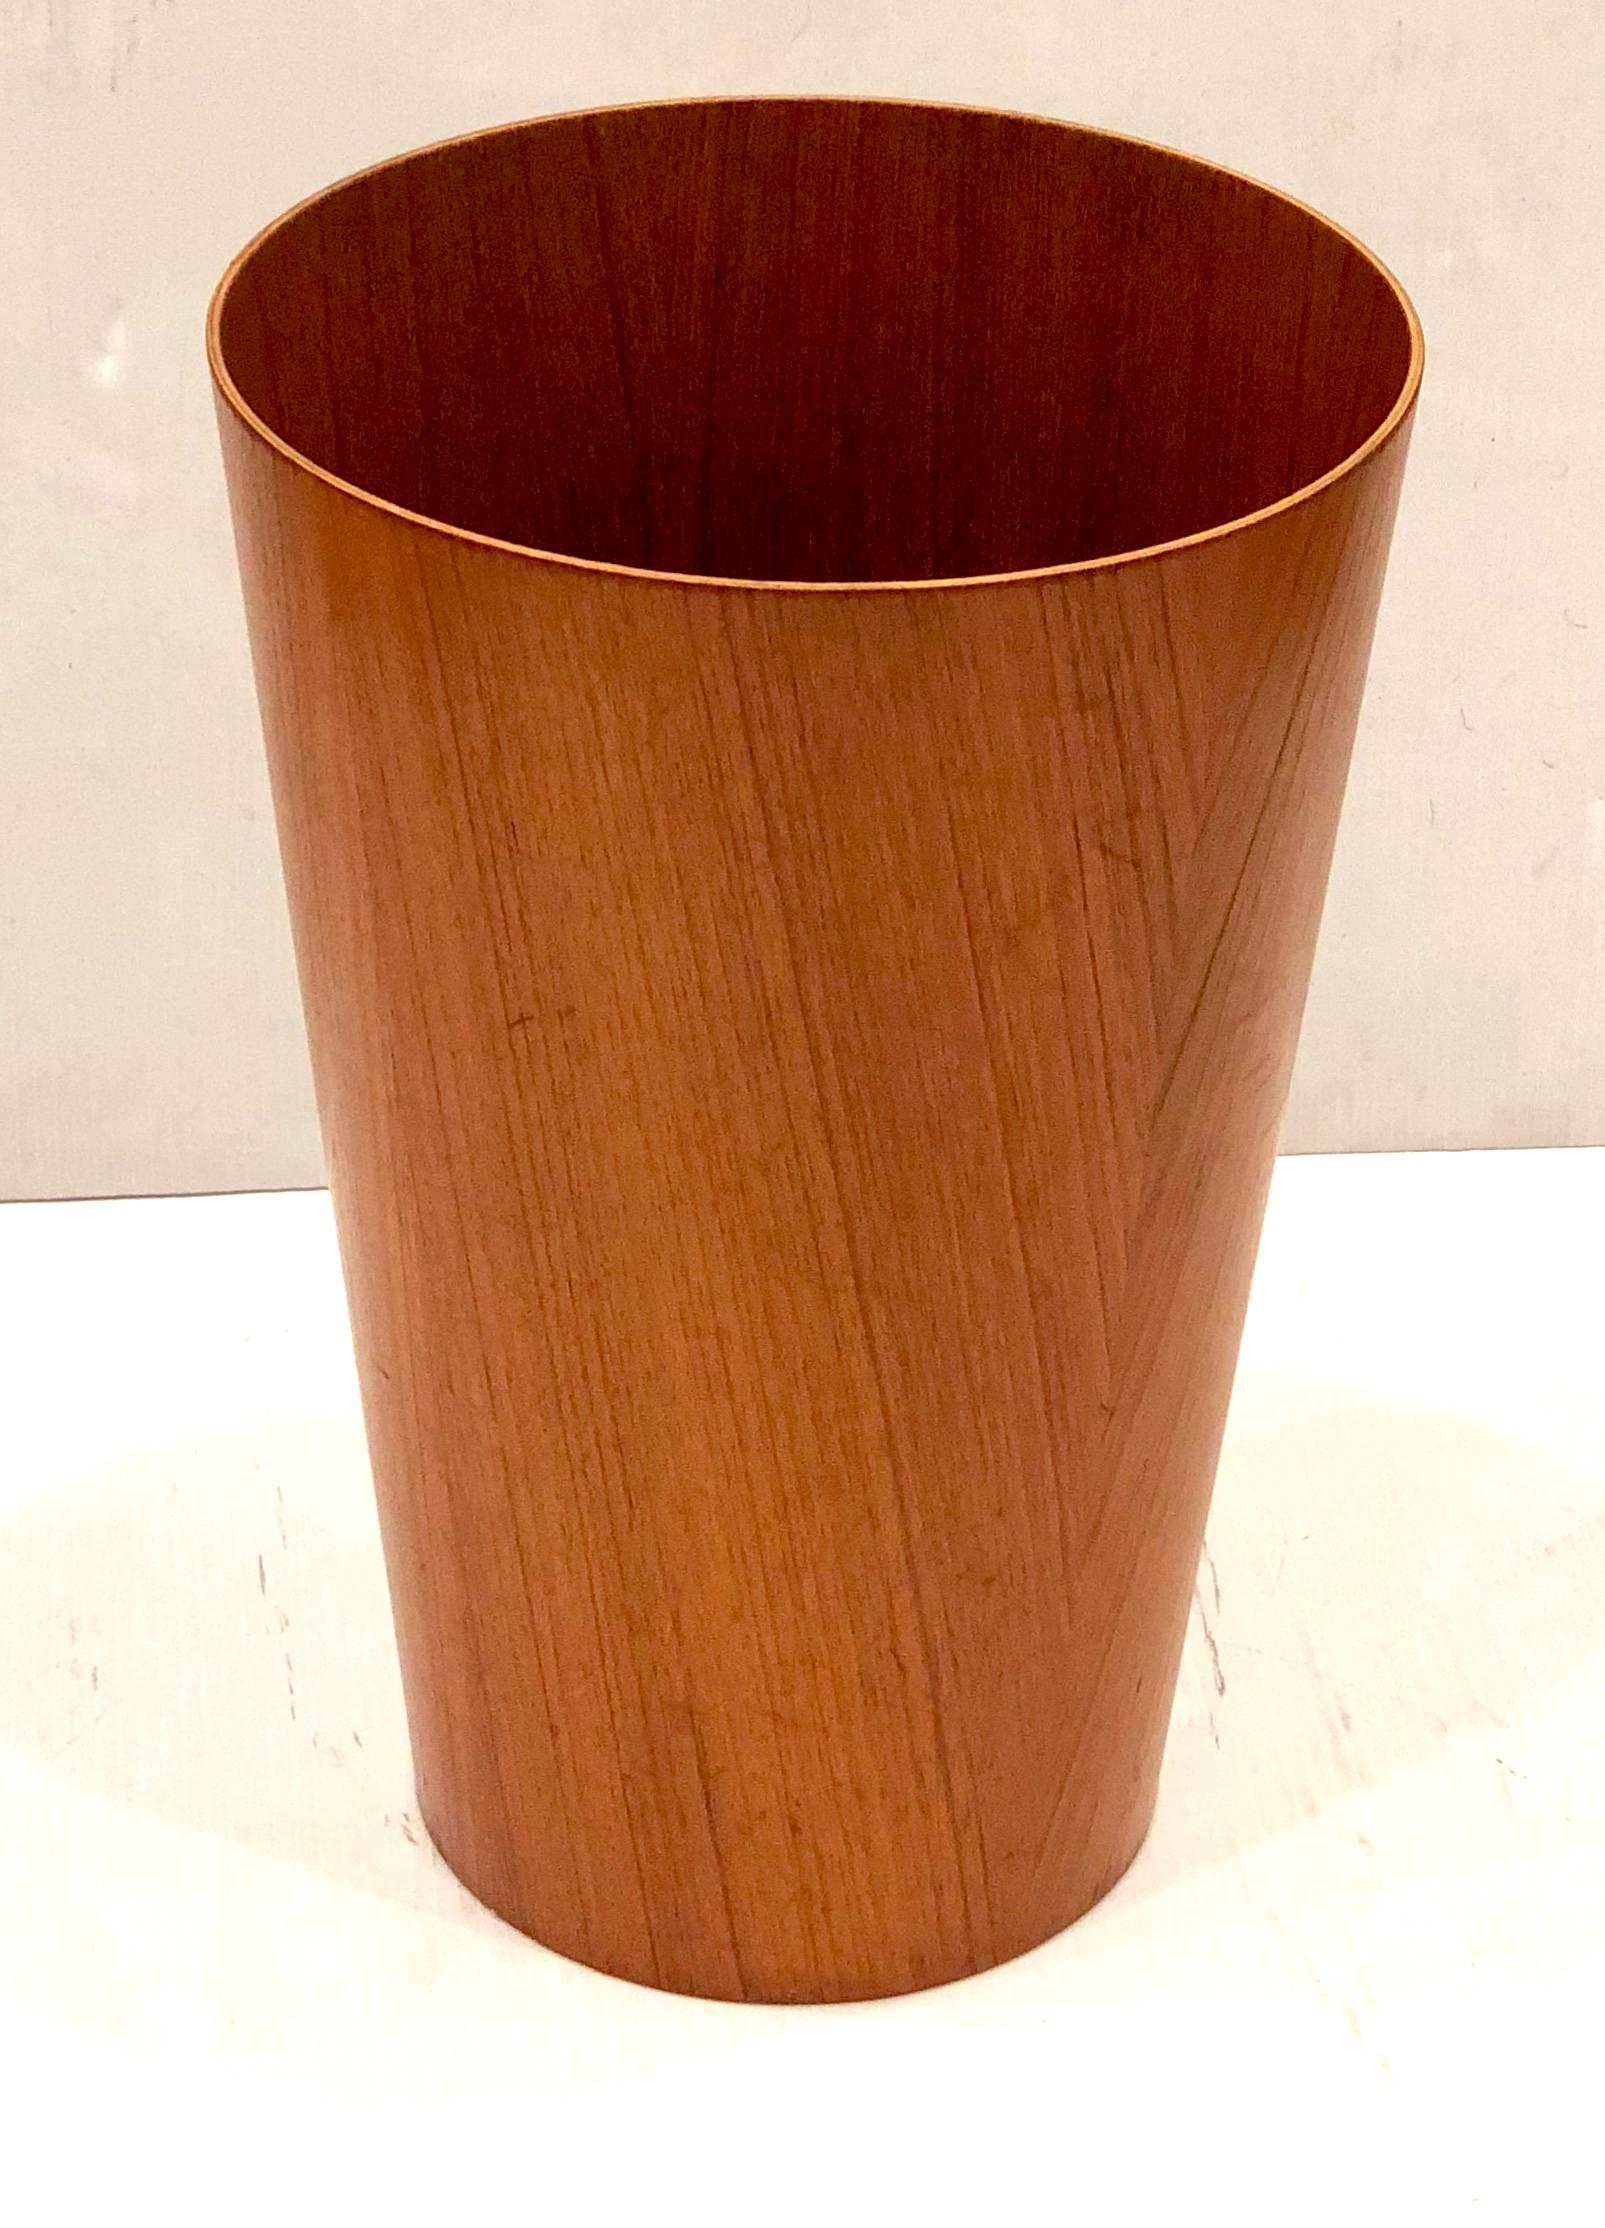 A beautiful Mid-Century Modern Scandinavian teak waste paper basket by Martin Aberg for Servex House of Rainbow Wood Products, circa 1960s. The piece is made in Sweden and in very good vintage condition. The waste basket is 15.5